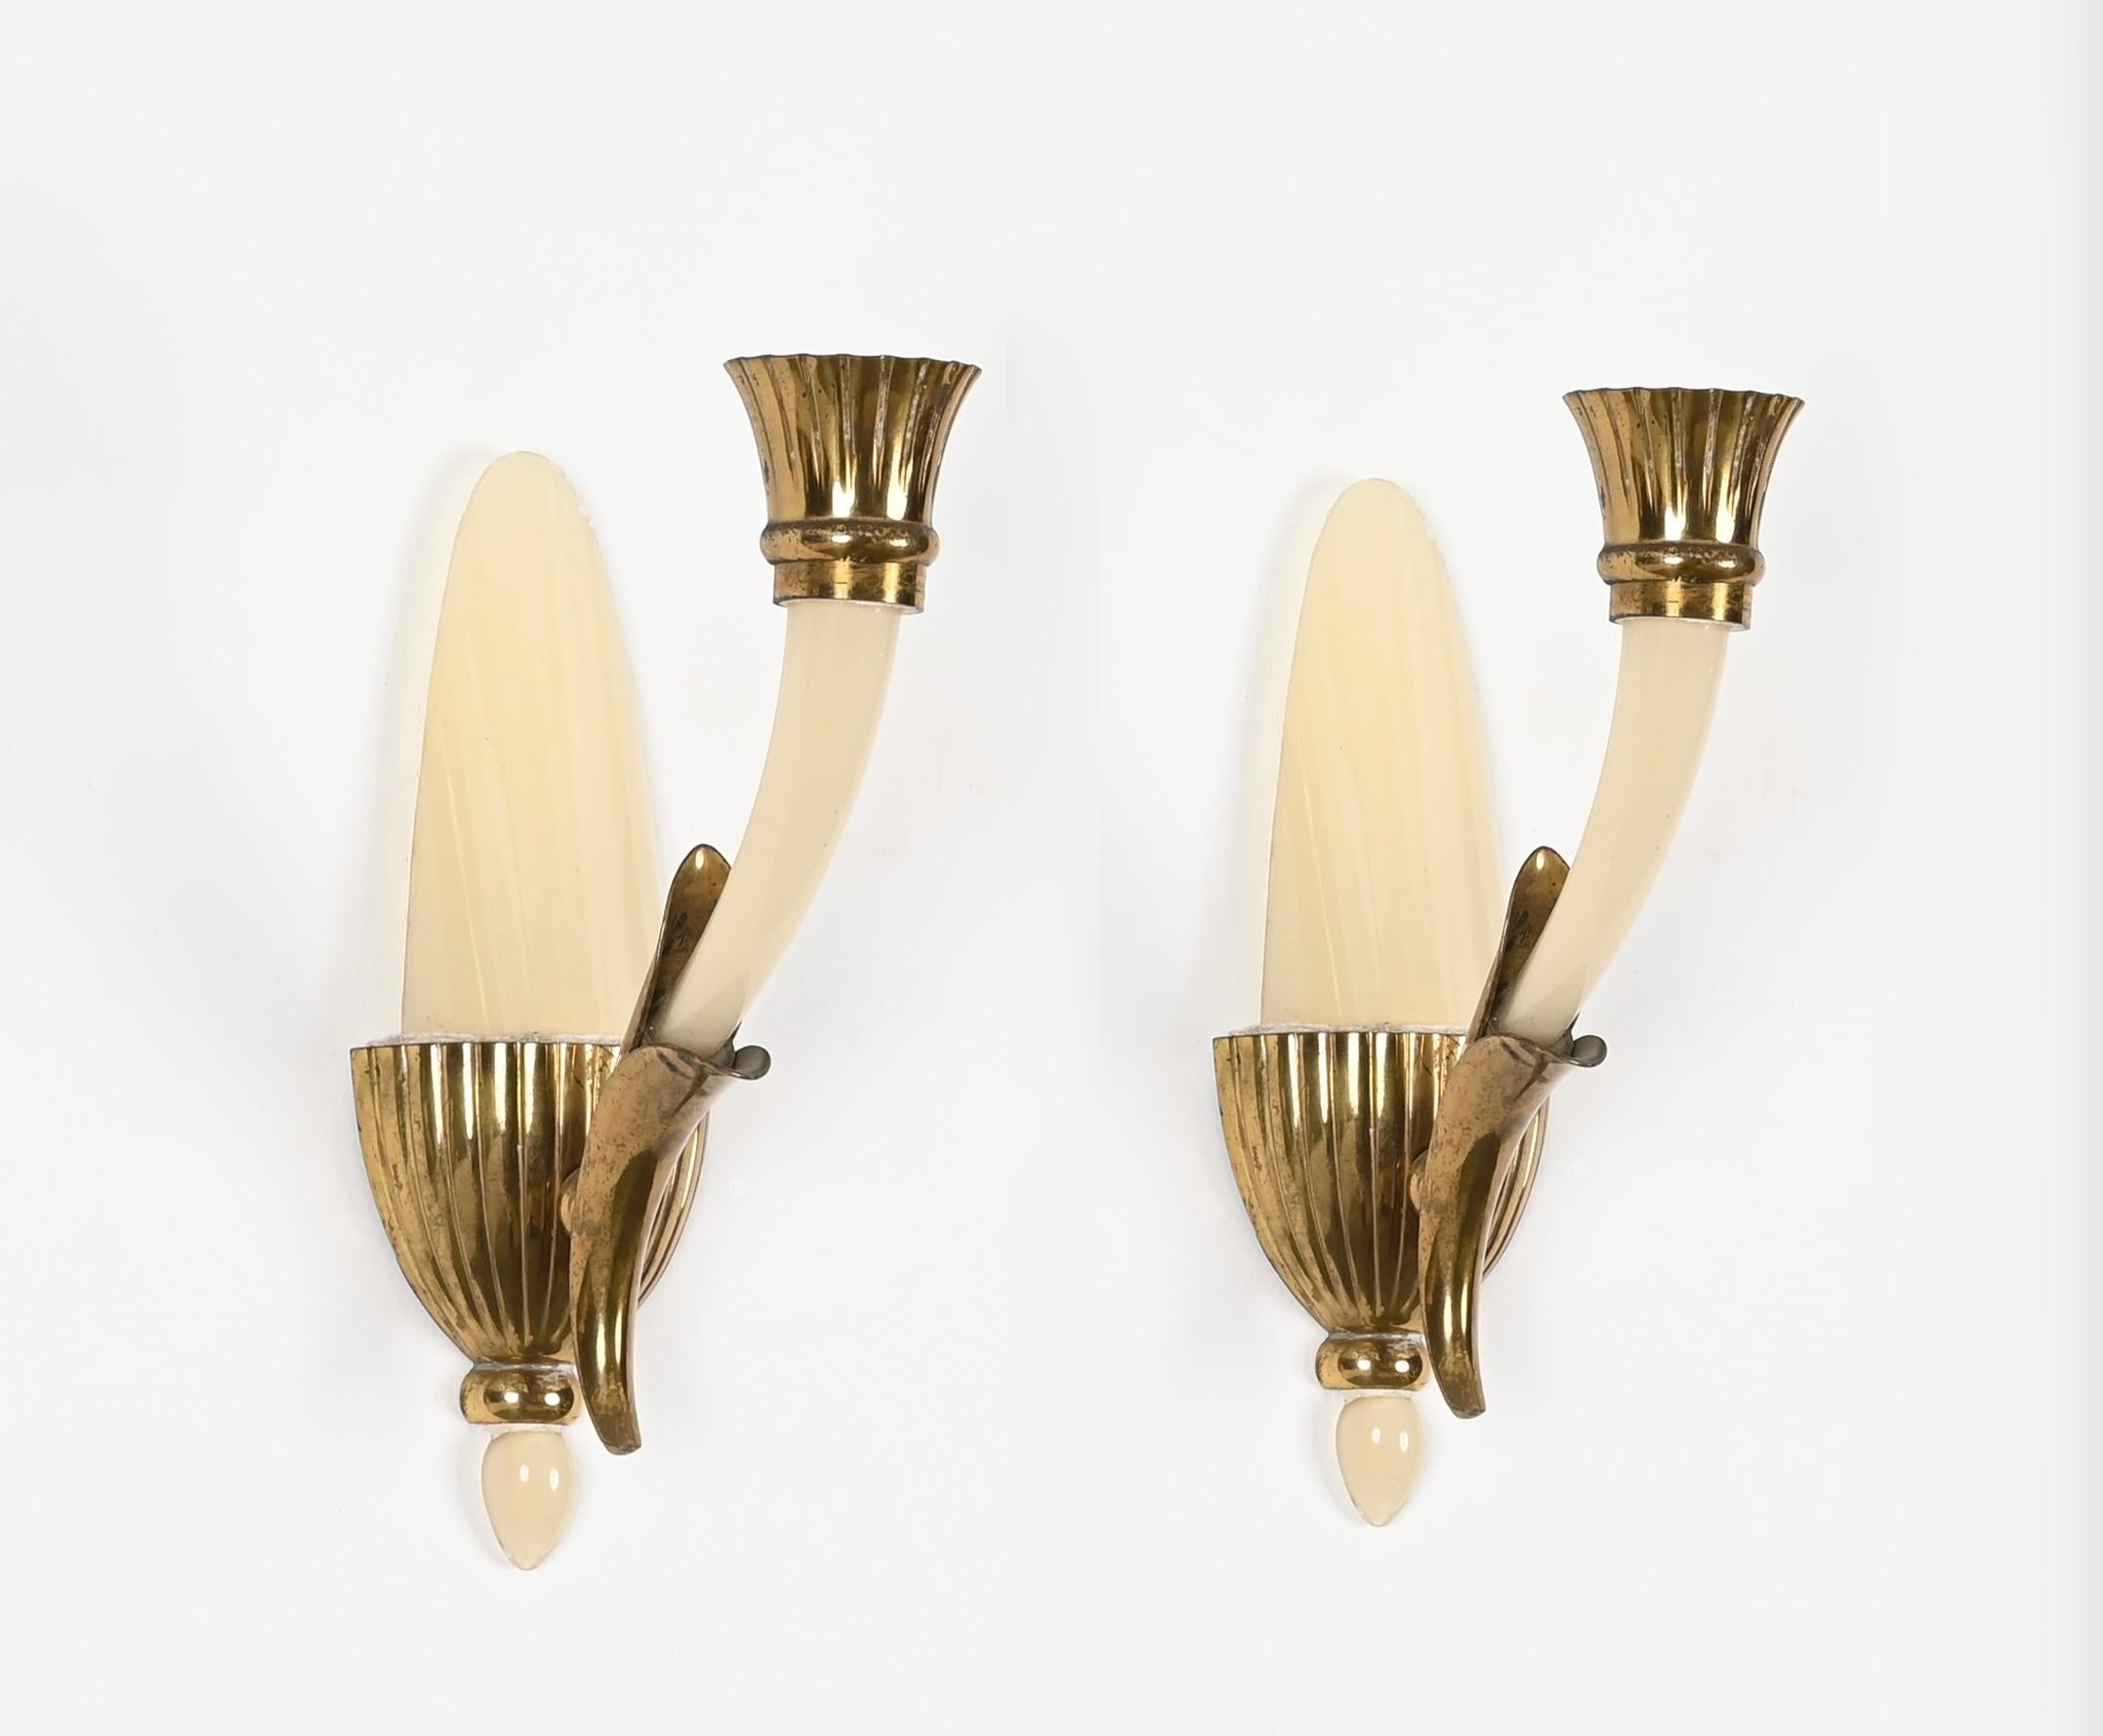 Magnificent pair of wall lamps in a gorgeous ivory Murano artglass and brass. These charming sconces were designed by Guglielmo Ulrich and produced in Venice, Italy during the 1940s. 

The quality of these rare sconces is mind-blowing, fully made in